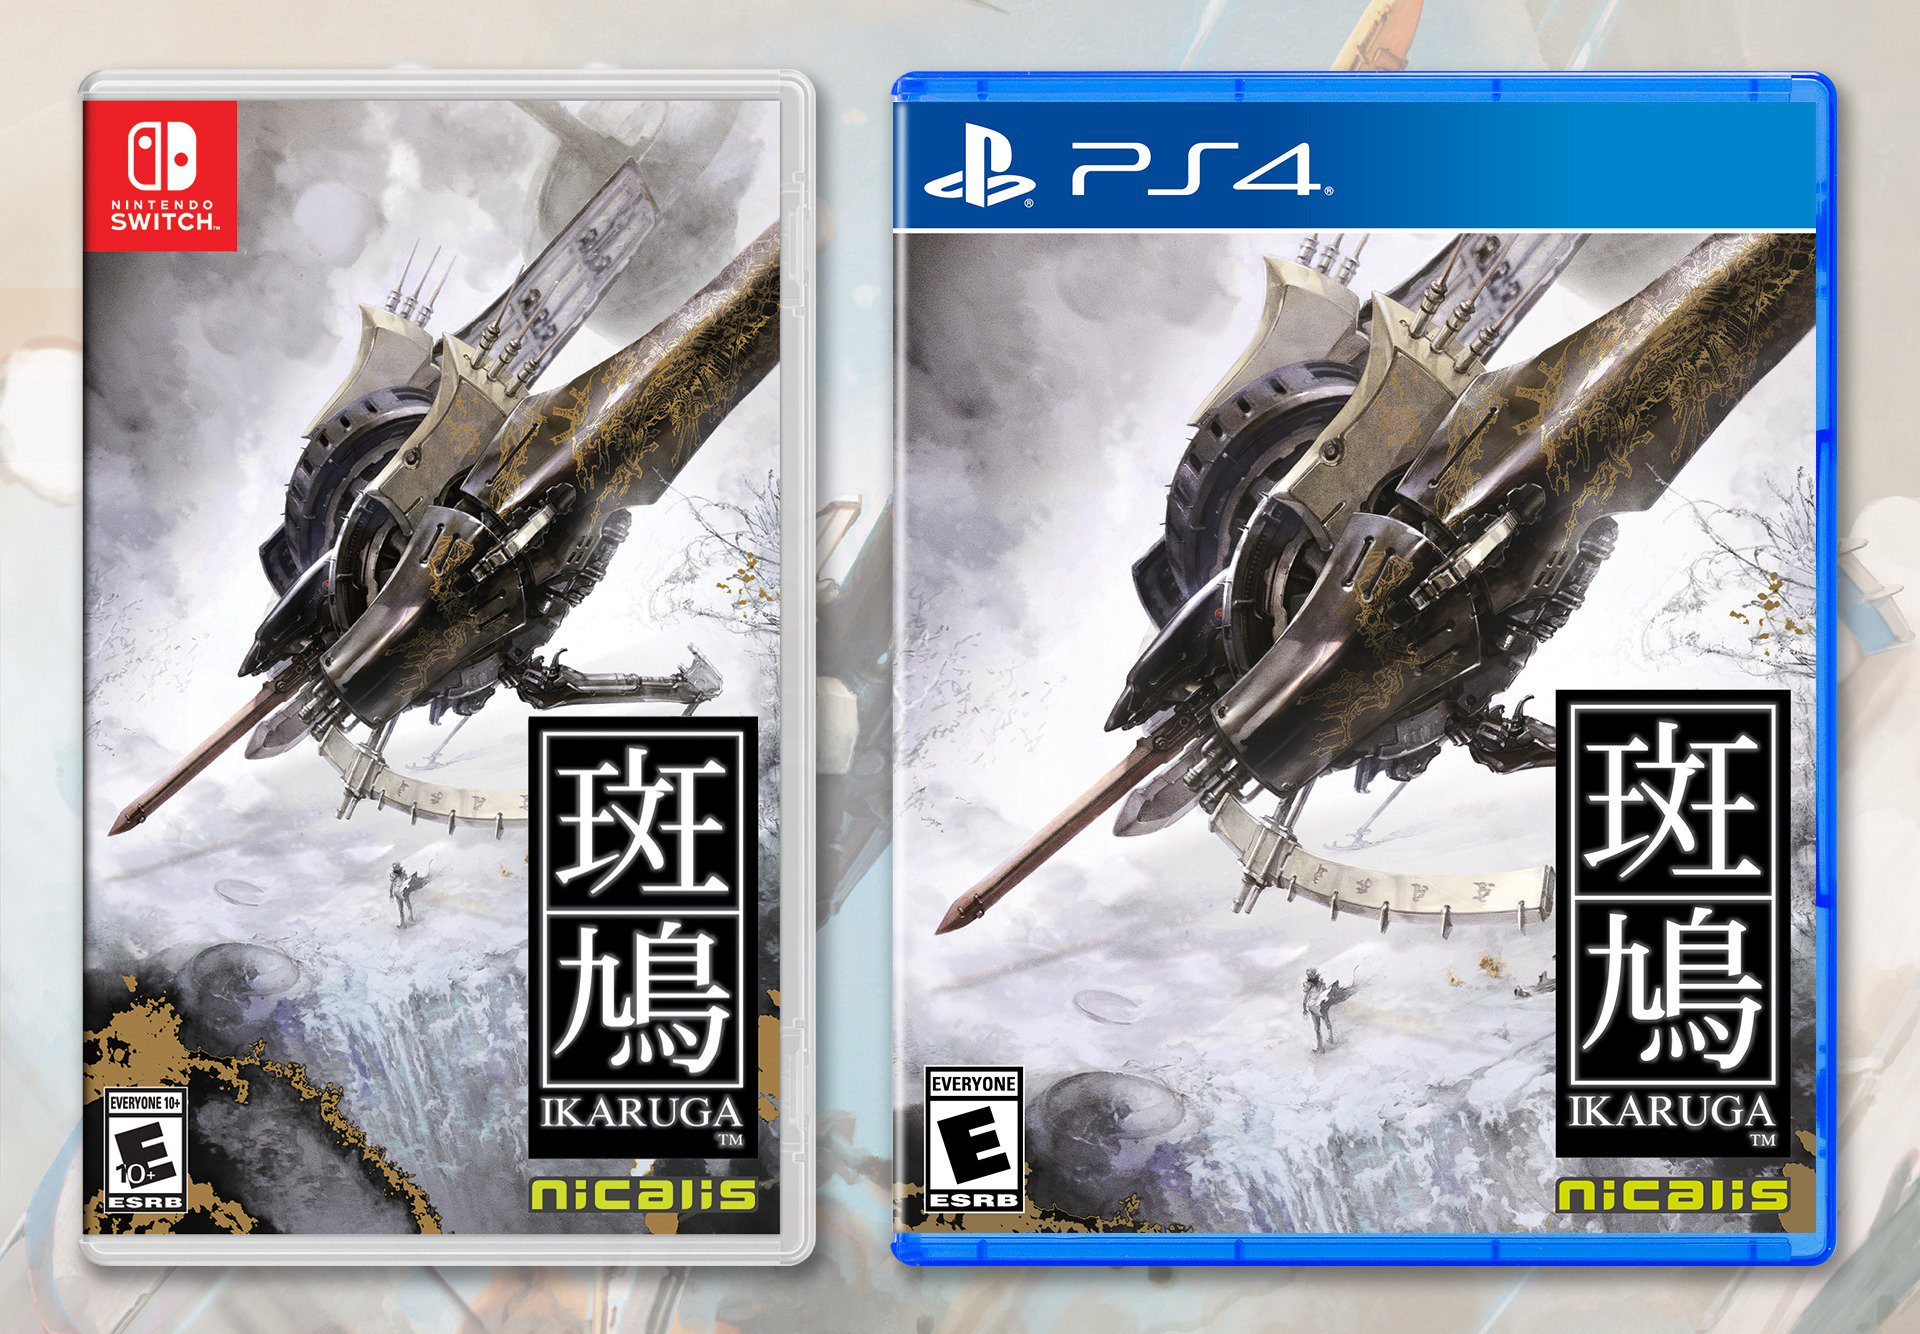 Nicalis teases Ikaruga PS4 and Switch physical edition - Gematsu